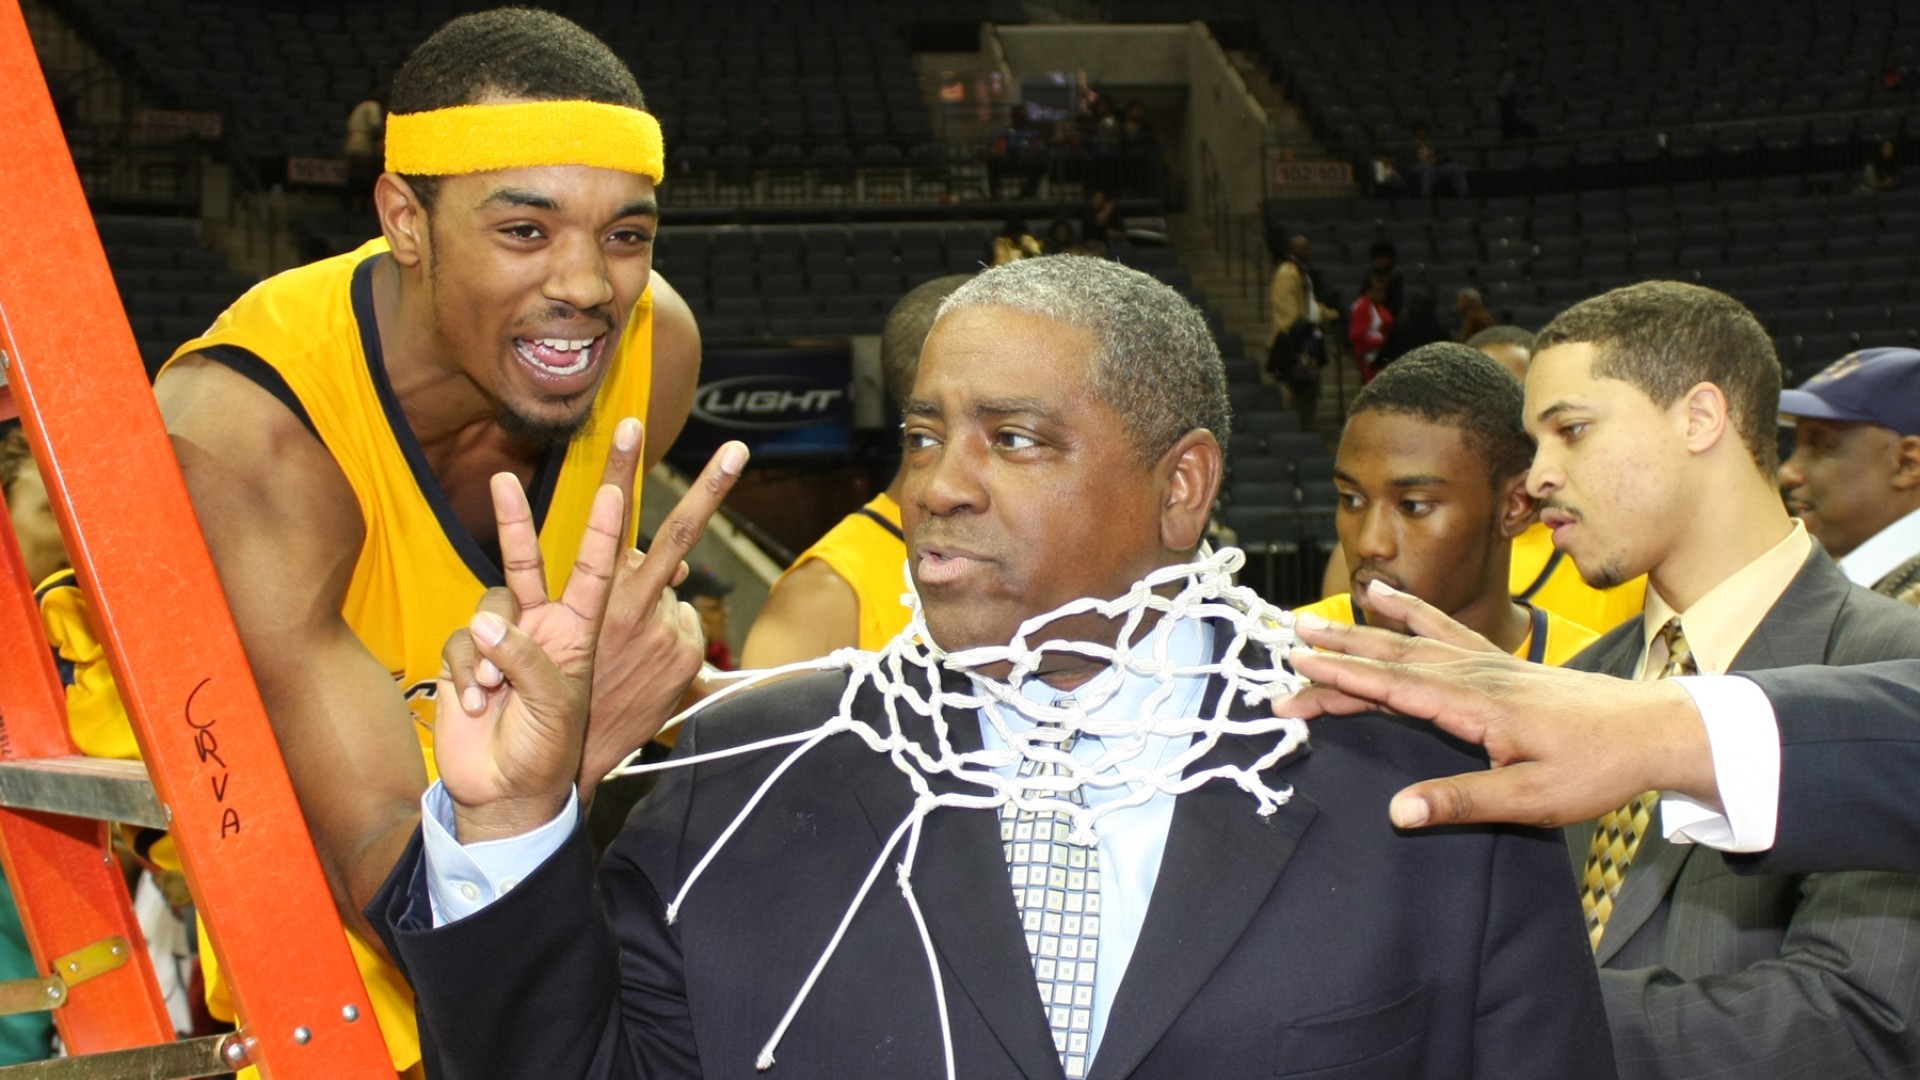 Steve Joyner with a basketball net around his head celebrating after the 2008 CIAA Championship